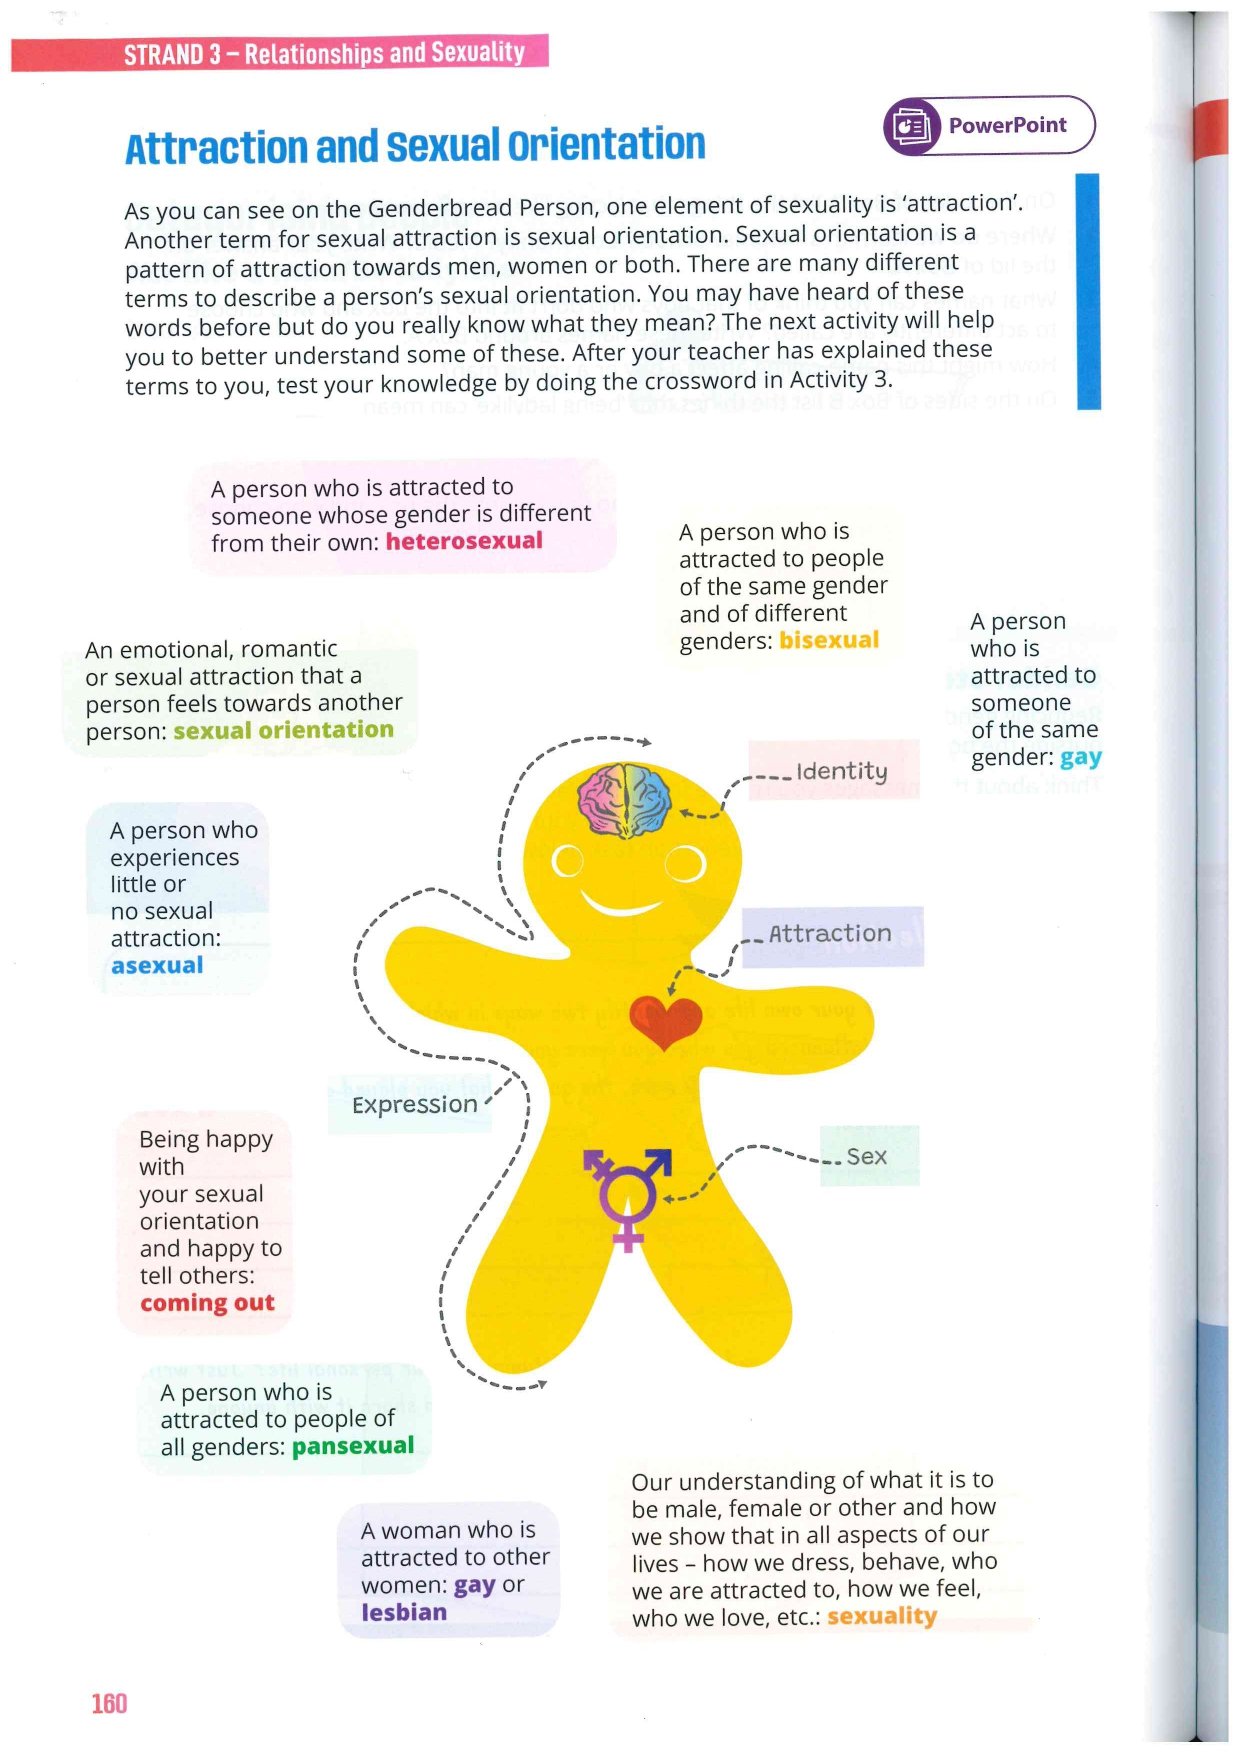 SPHE Textbook EdCo - Strand 3 Relationships and Sexuality for 1st yrs - Health and Wellbeing SPHE 1 2023_pages-to-jpg-0003.jpg